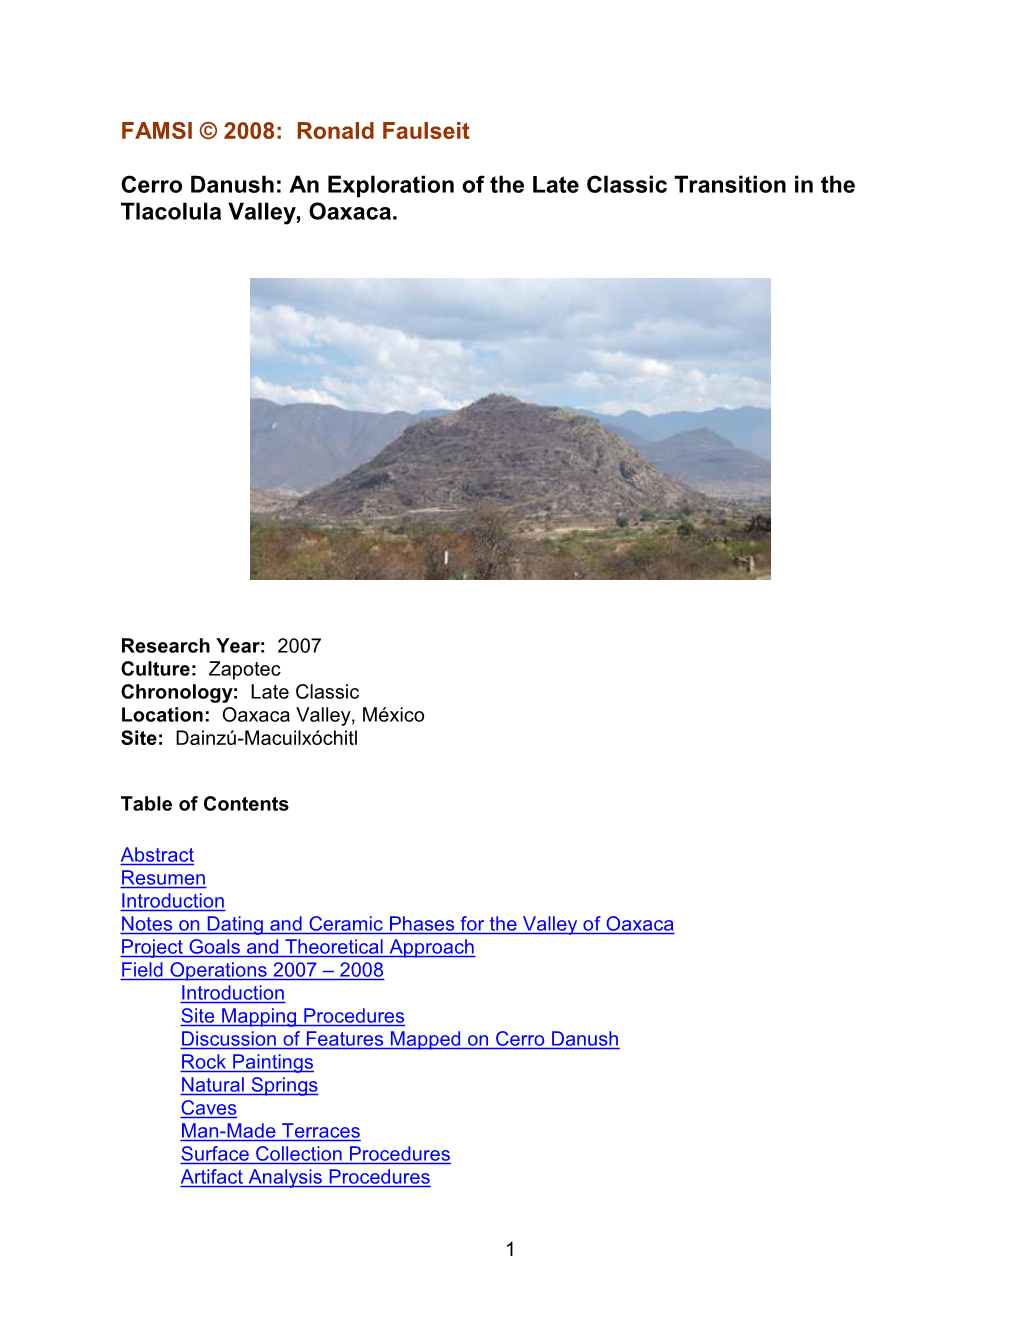 Cerro Danush: an Exploration of the Late Classic Transition in the Tlacolula Valley, Oaxaca